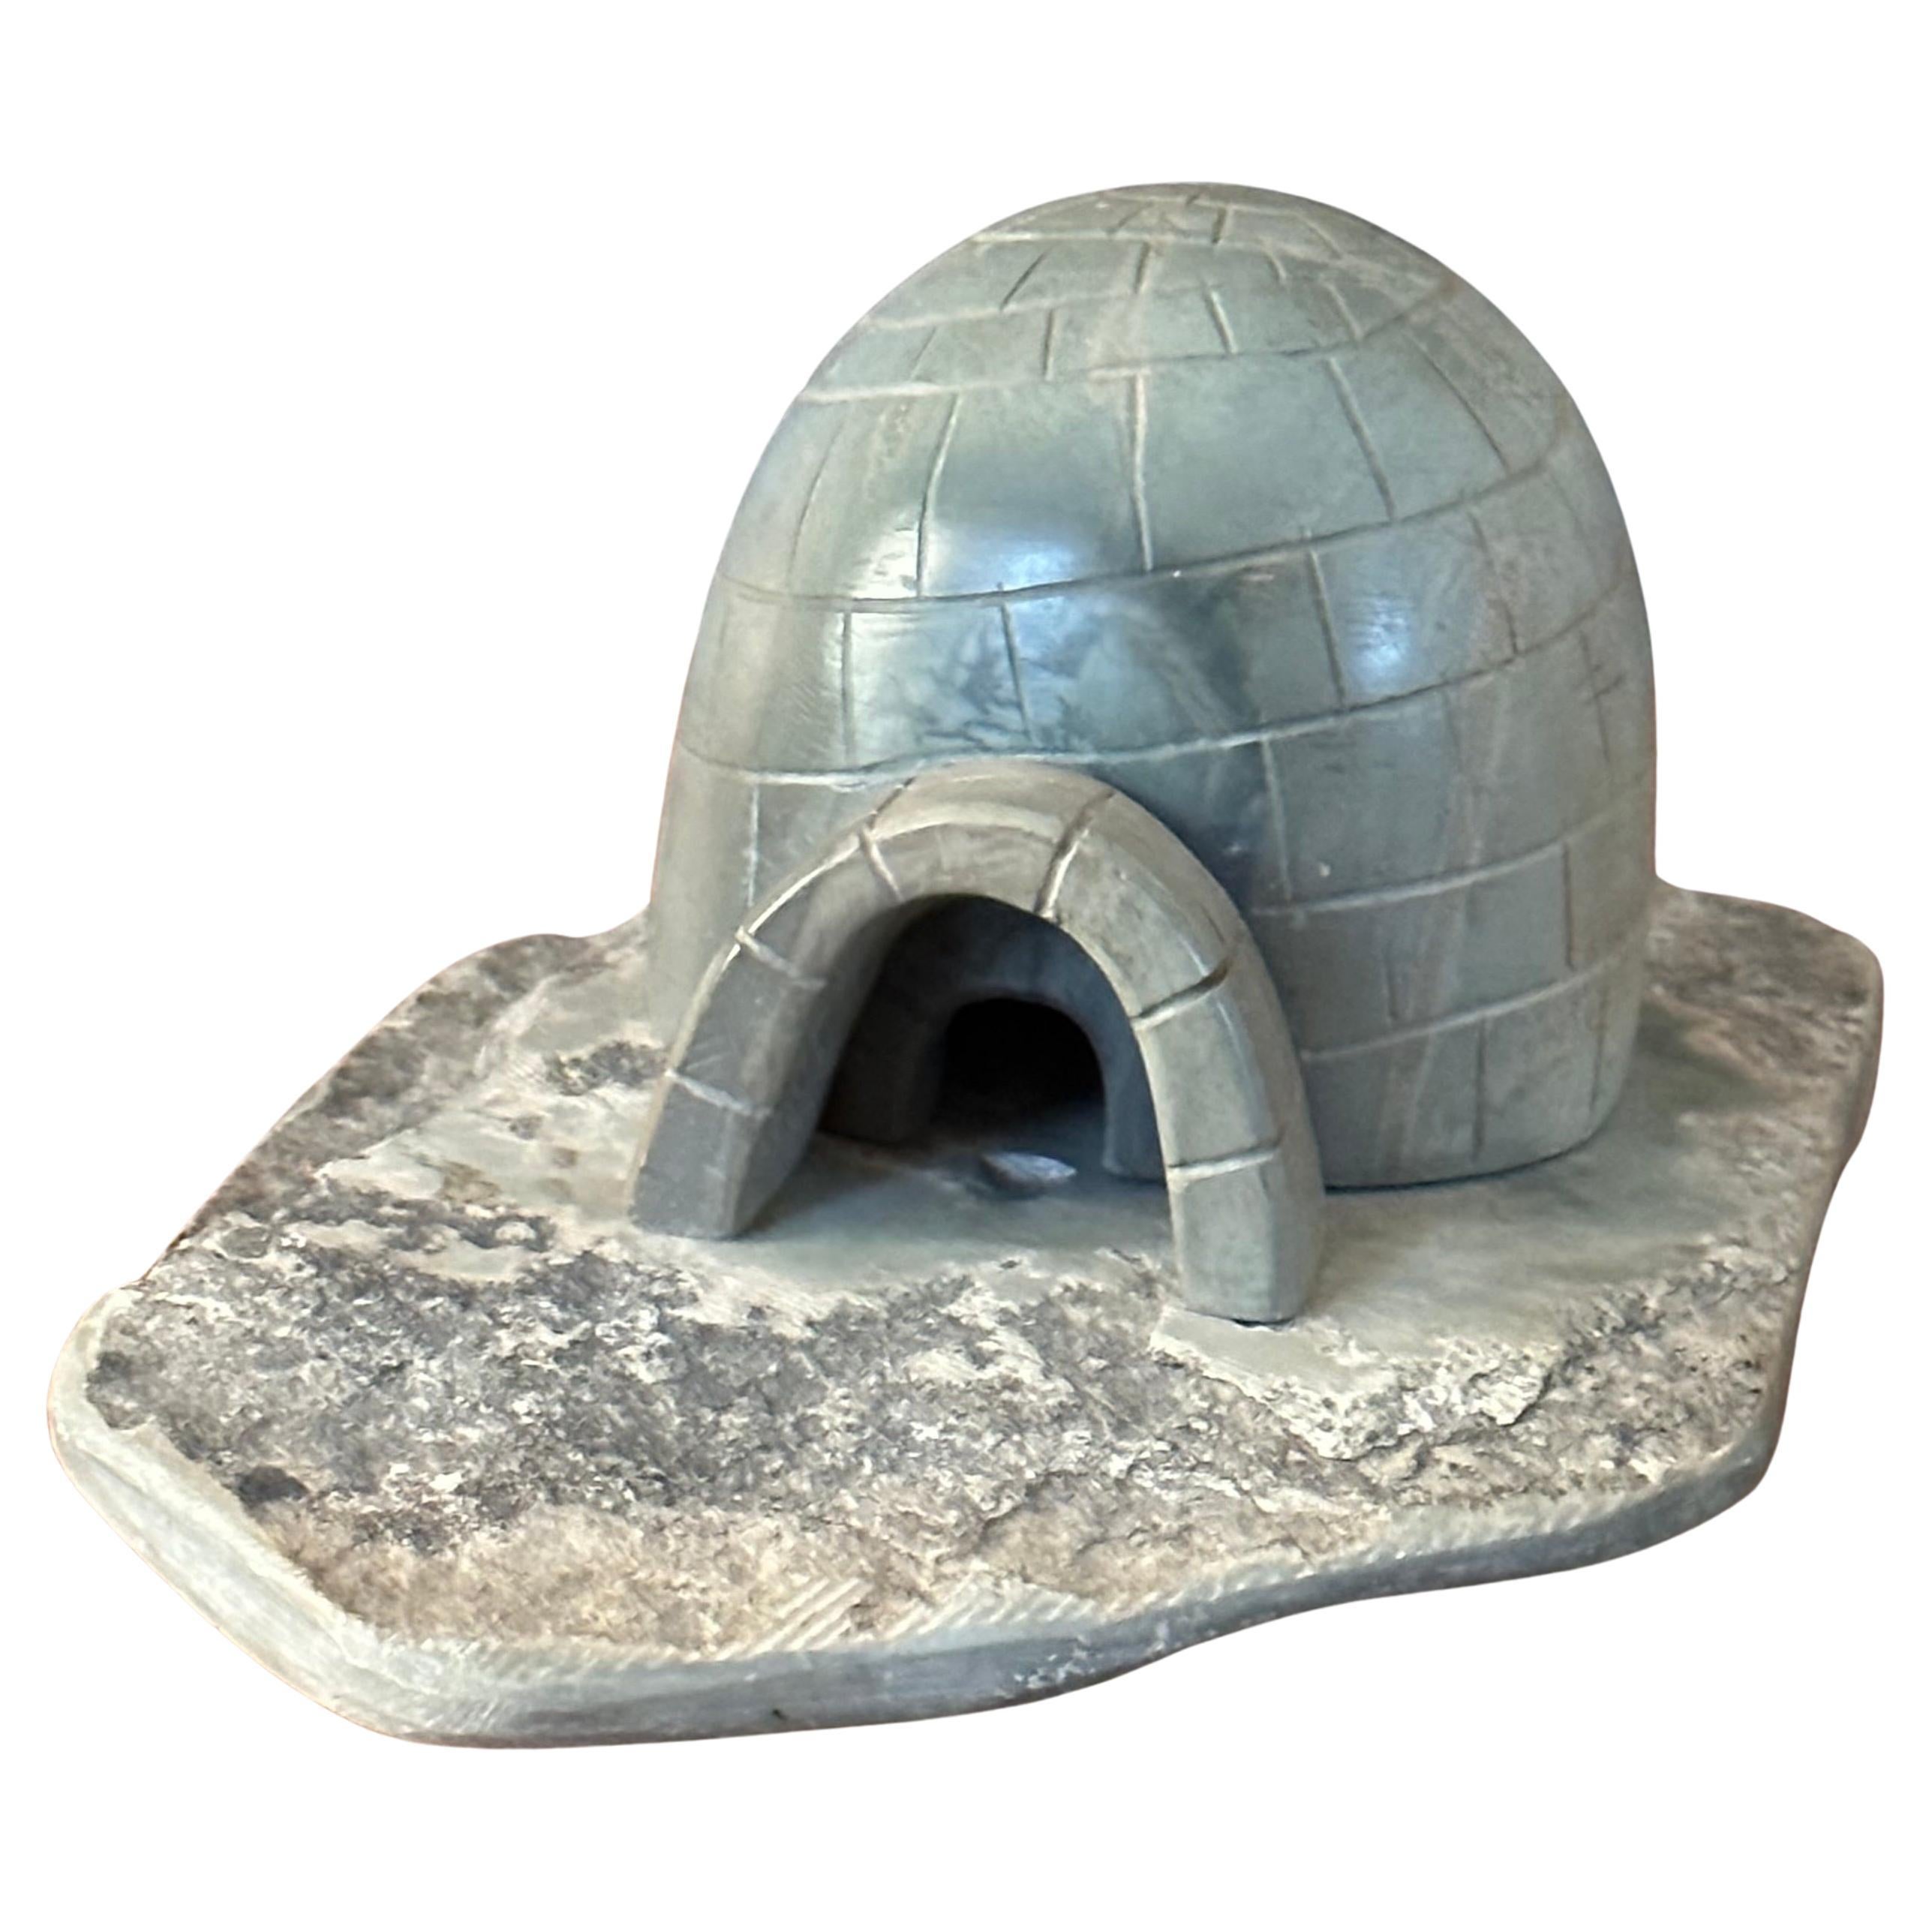 Gorgeous Inuit hand carved soapstone igloo sculpture by, circa 1980s. The piece is in very good condition with no chips or cracks and measures 5.25